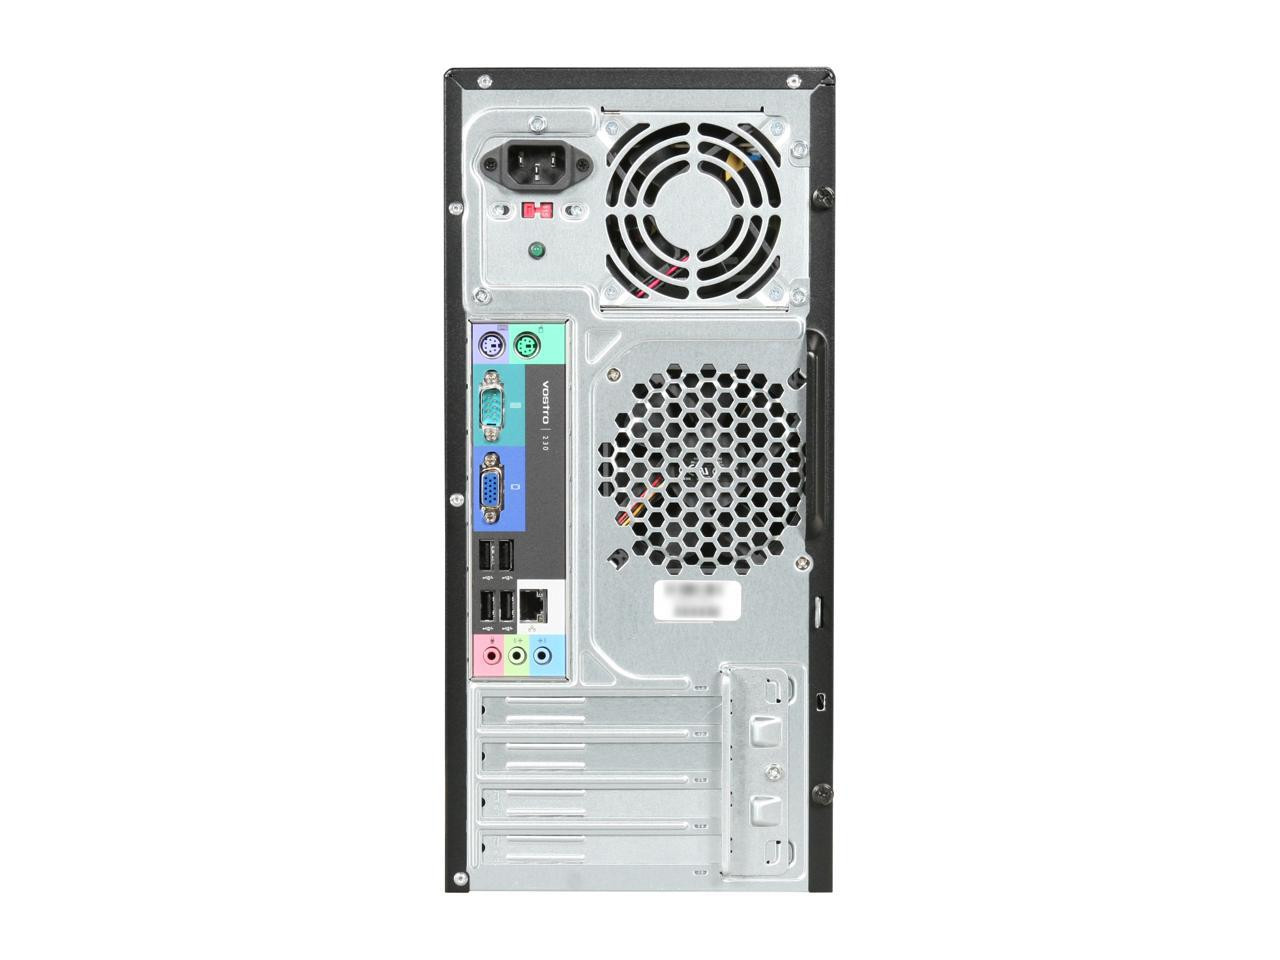 Dell Vostro 230 Tower Windows 10 Computer - Discount Electronics